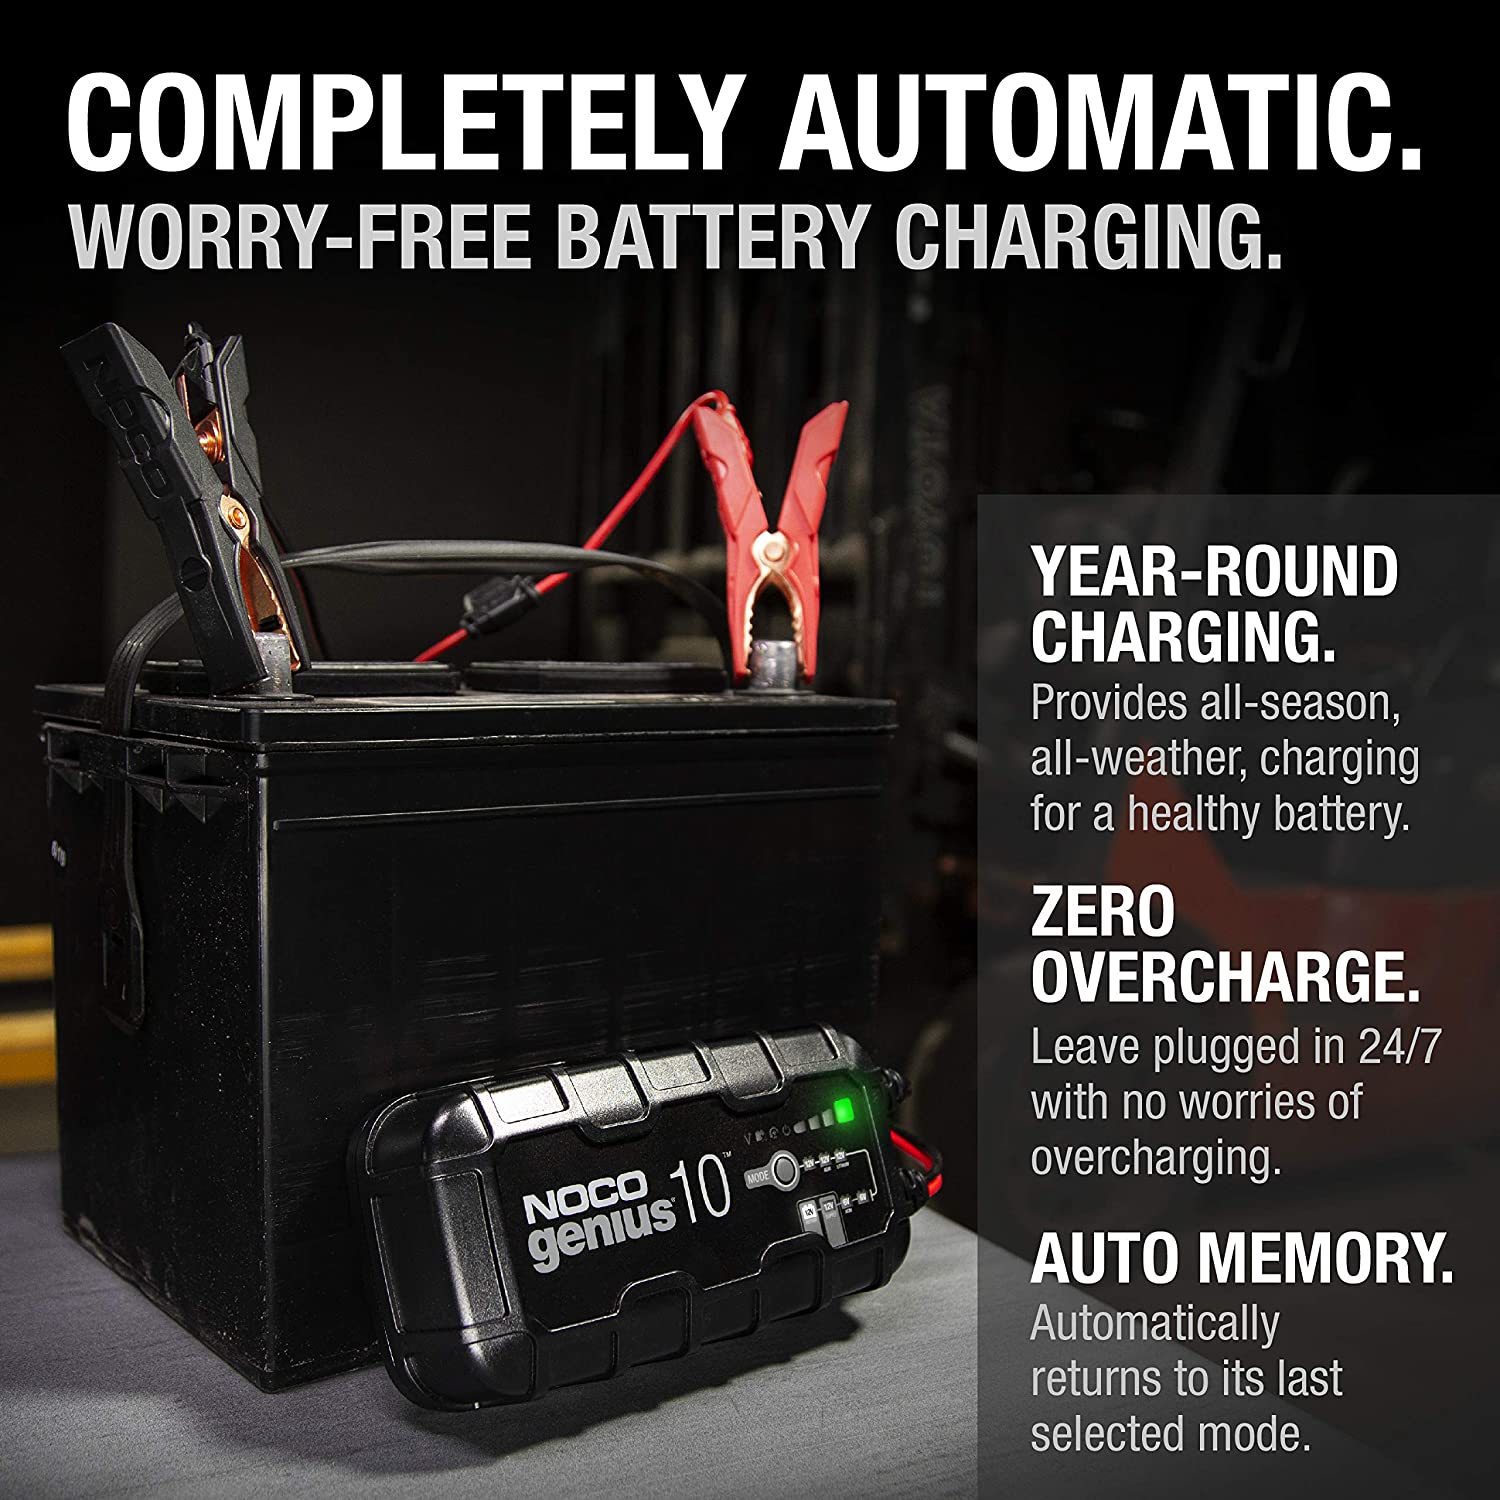 NOCO GENIUS10, 10-Amp Fully-Automatic Smart Charger, 6V And 12V Battery Charger